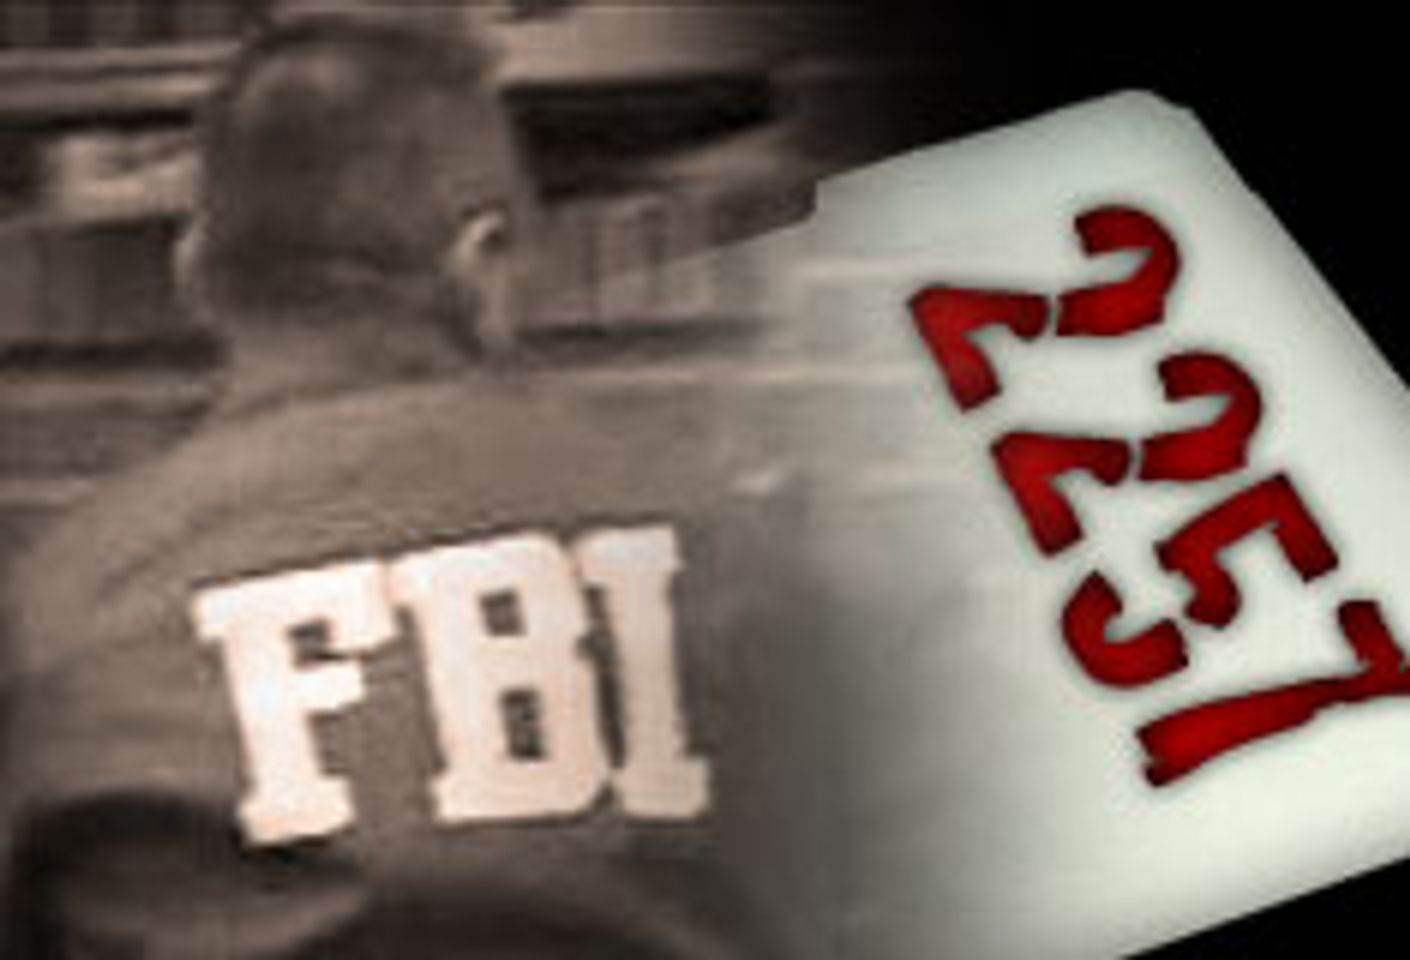 FBI Continues 2257 Inspections